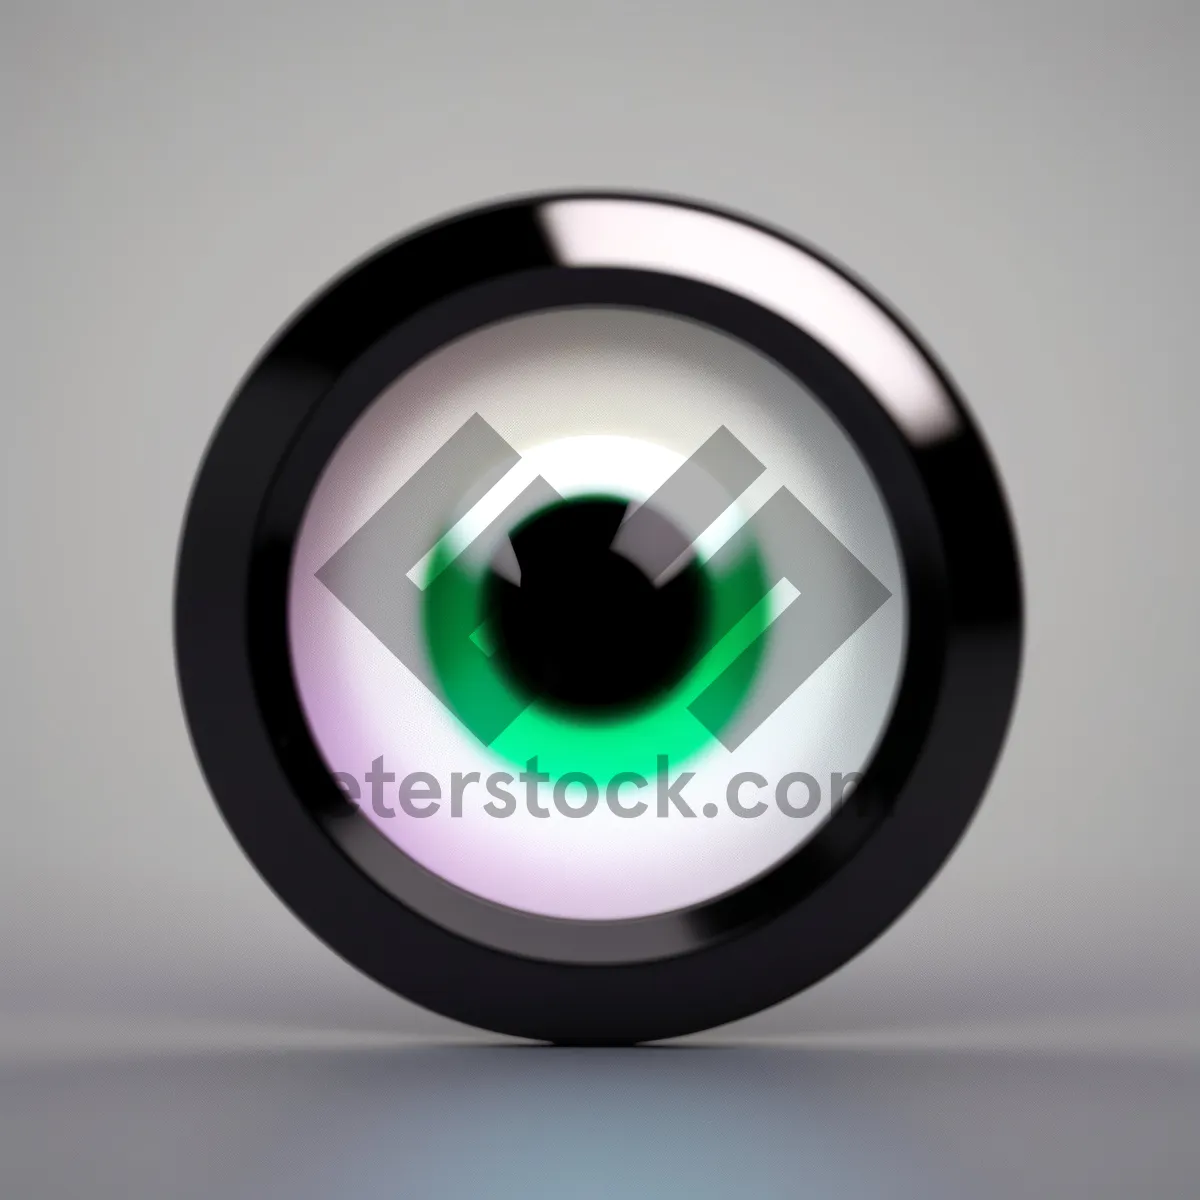 Picture of Shiny Black Circle Button with Reflection